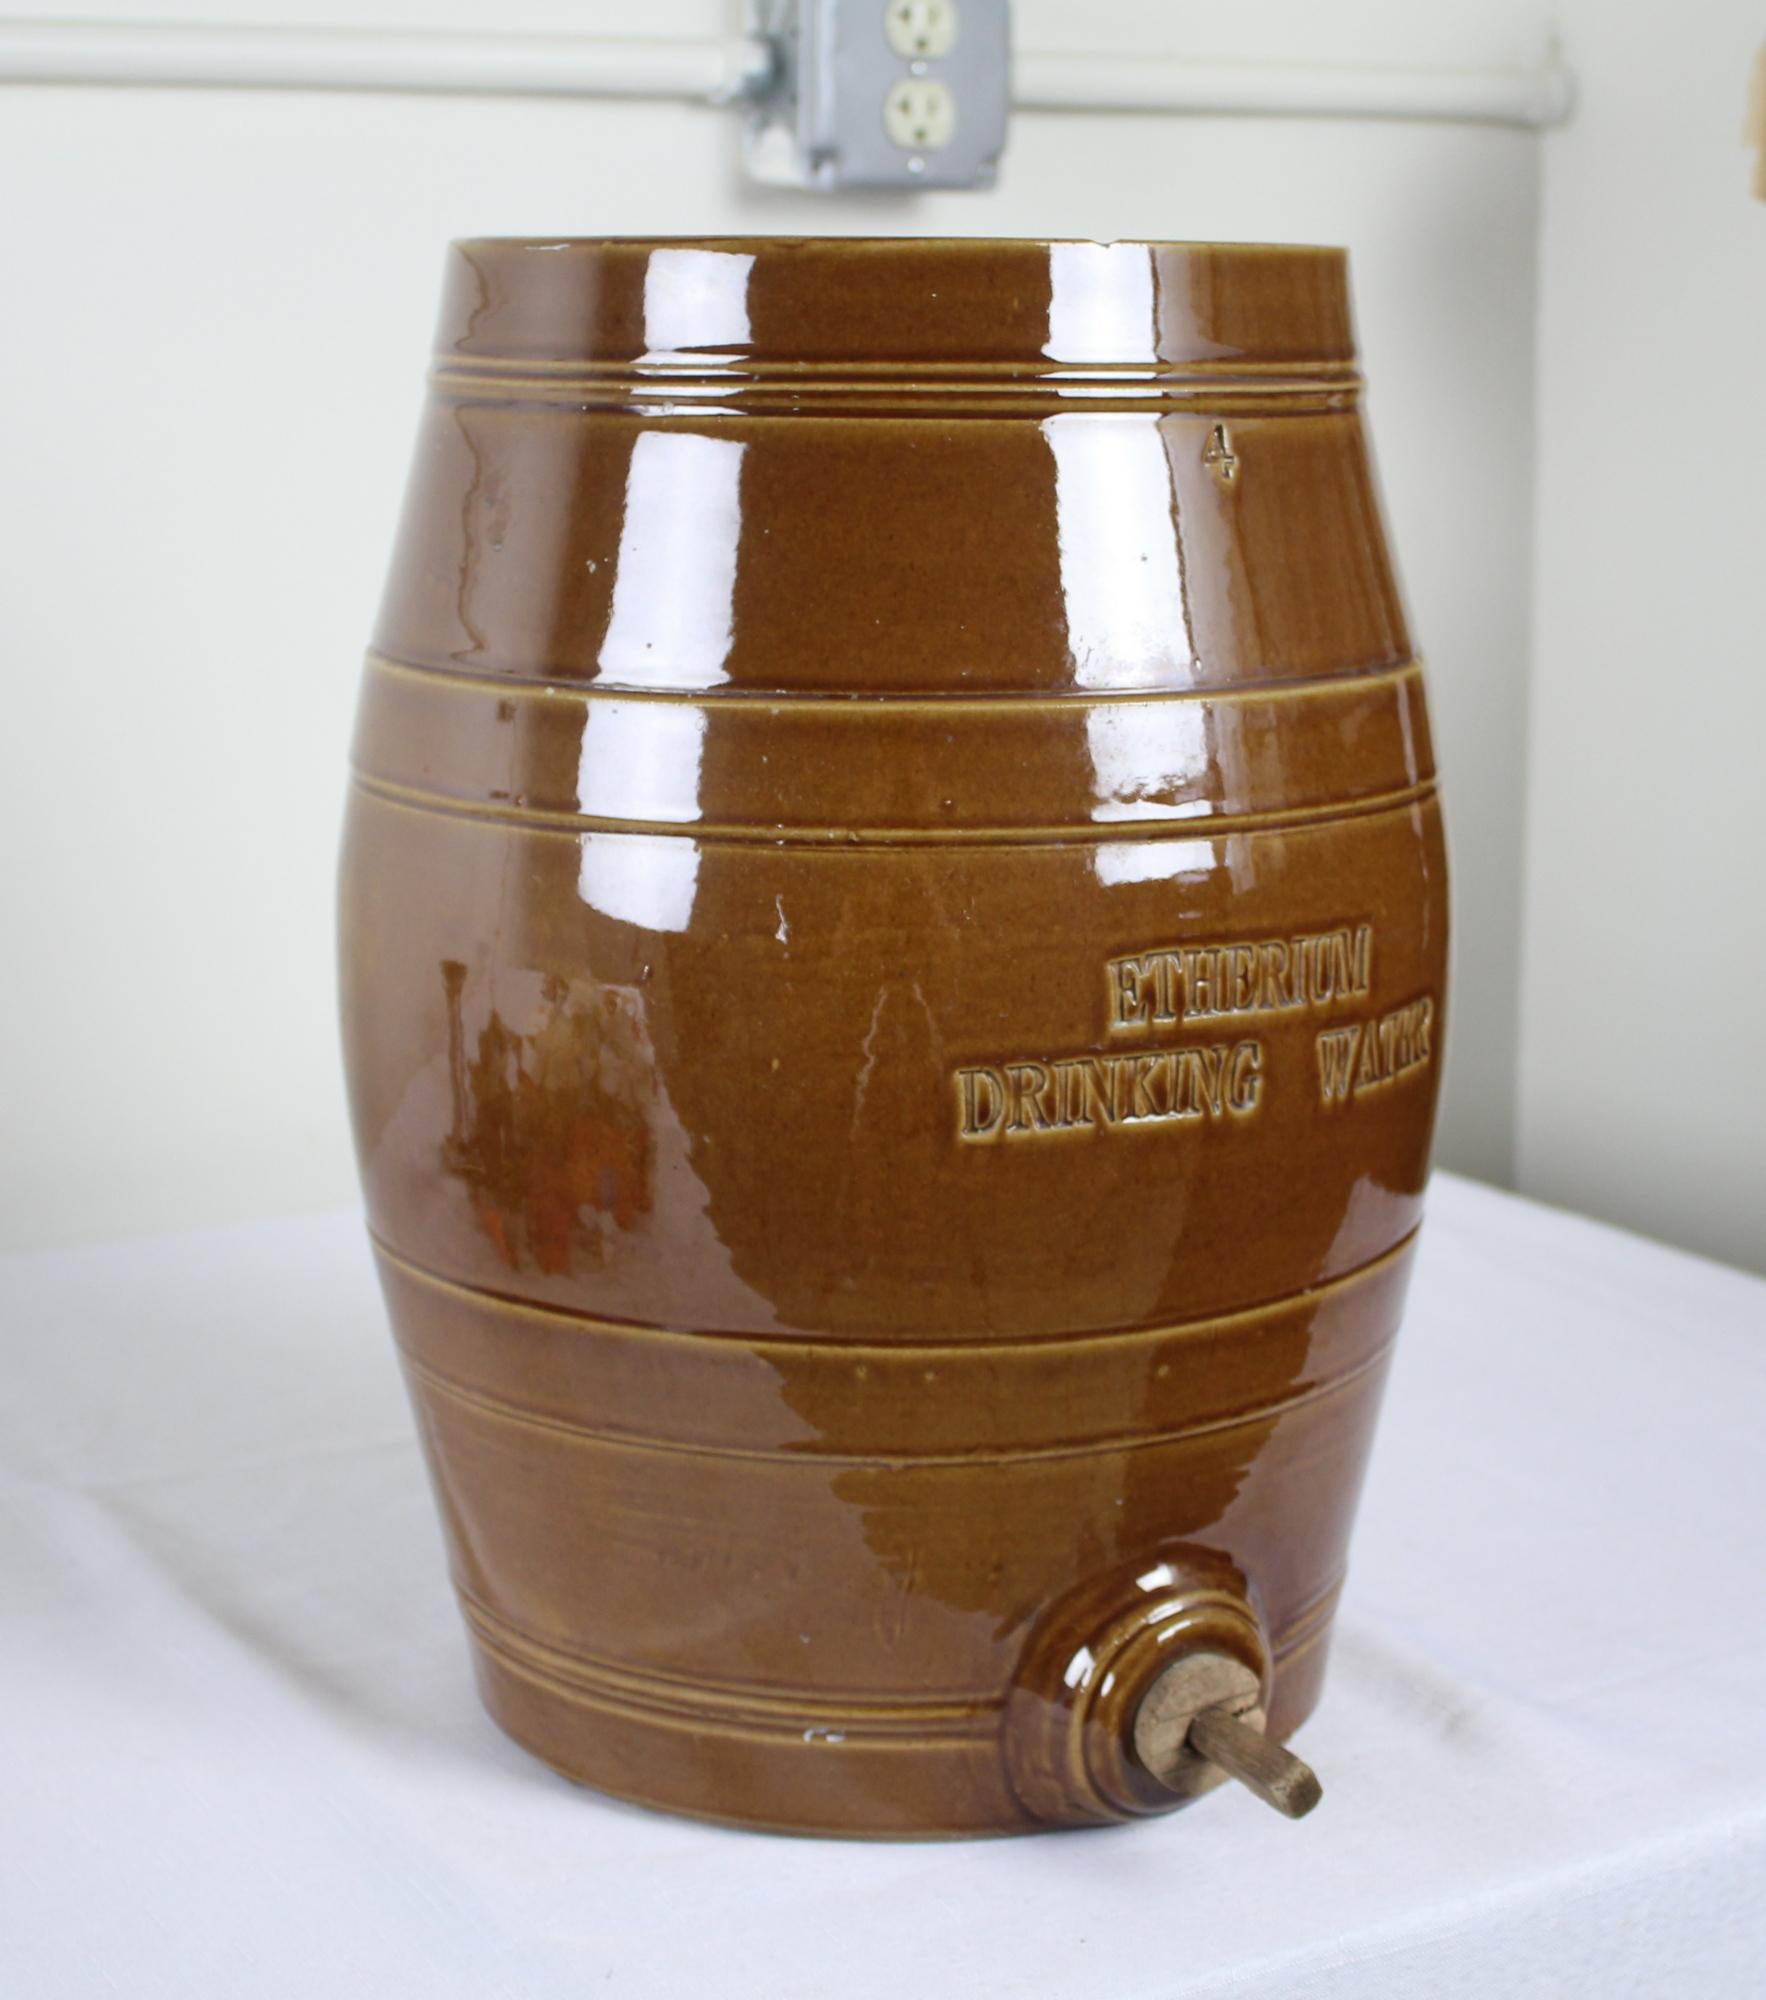 This type of crock is quite rare in the 4 gallon form. An unusual piece of history, the piece was used to dispense ether diluted in water. On the front of the crock can be seen the words 